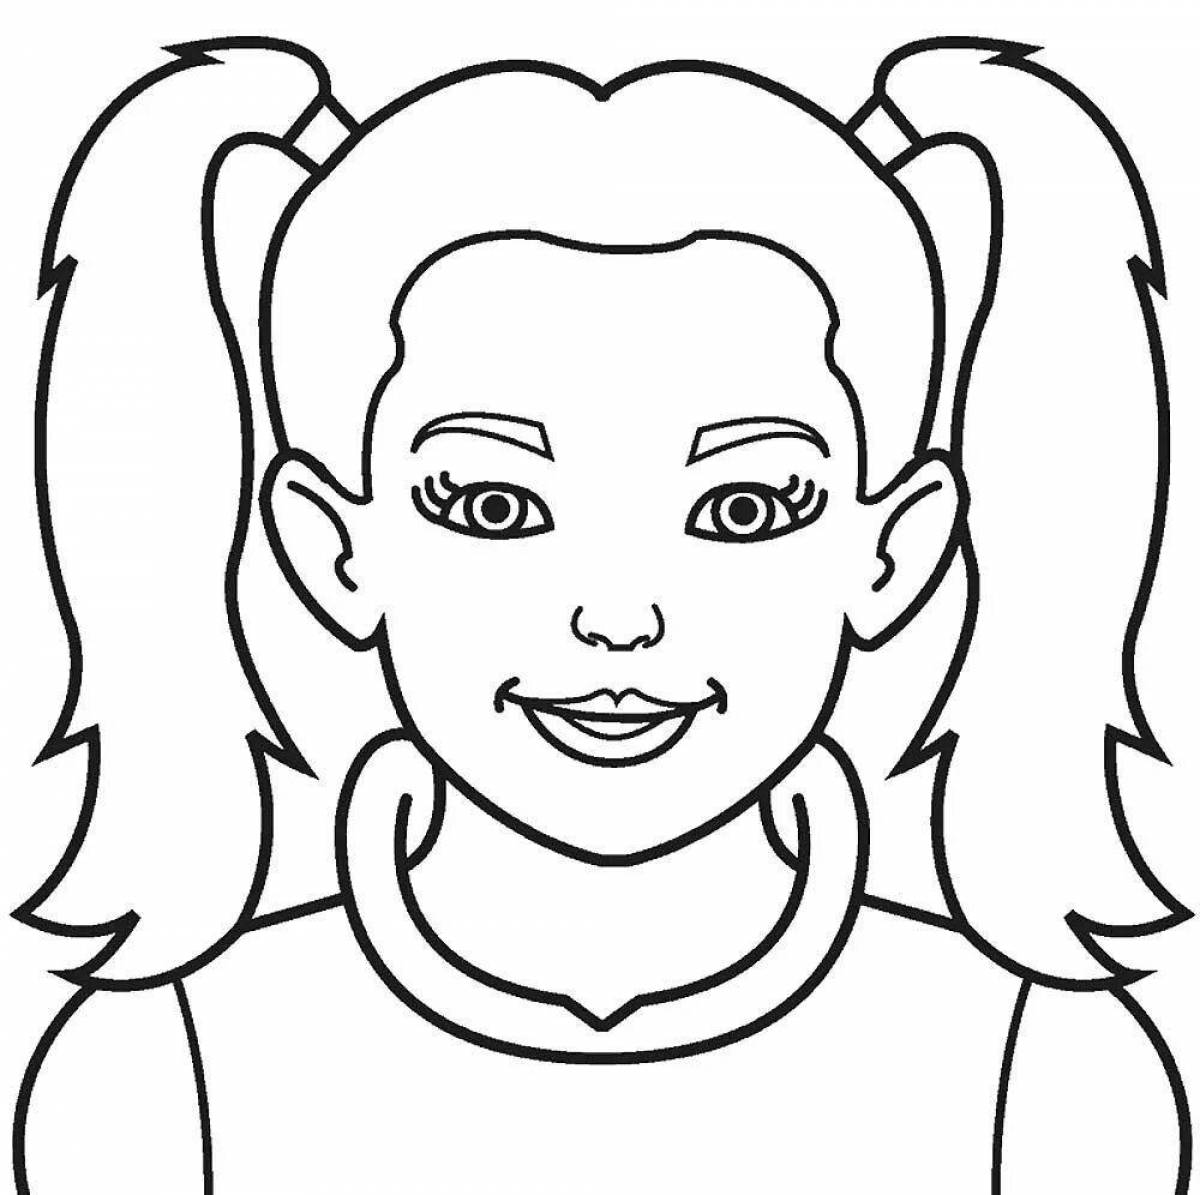 Fairy port coloring page